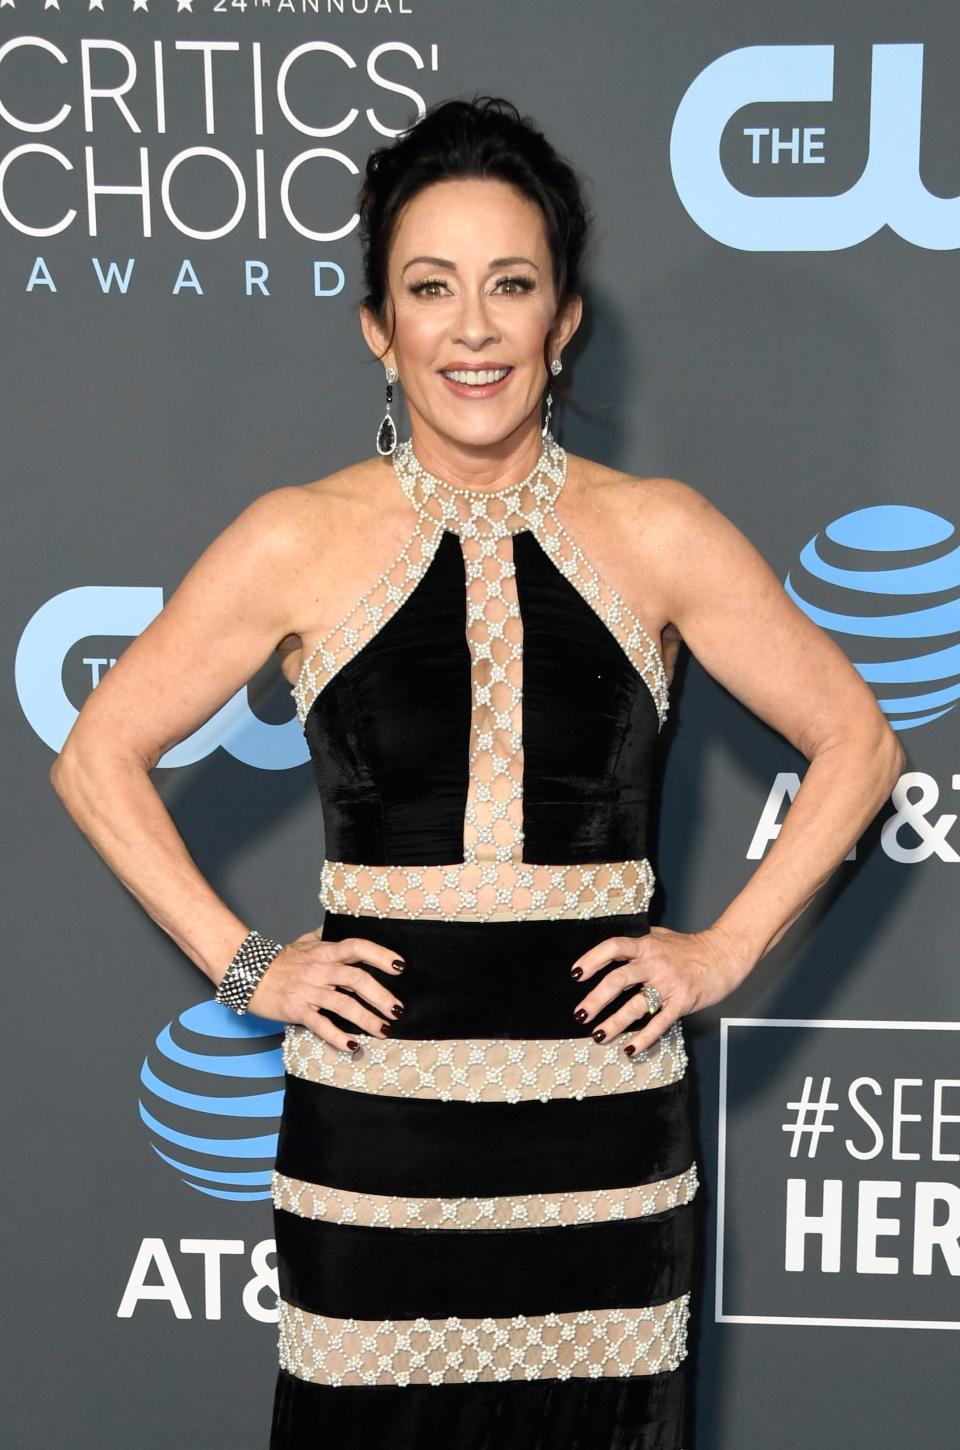 Patricia Heaton listed off her many accomplishments since turning 50 following Don Lemon's comments about women in their &quot;prime.&quot;